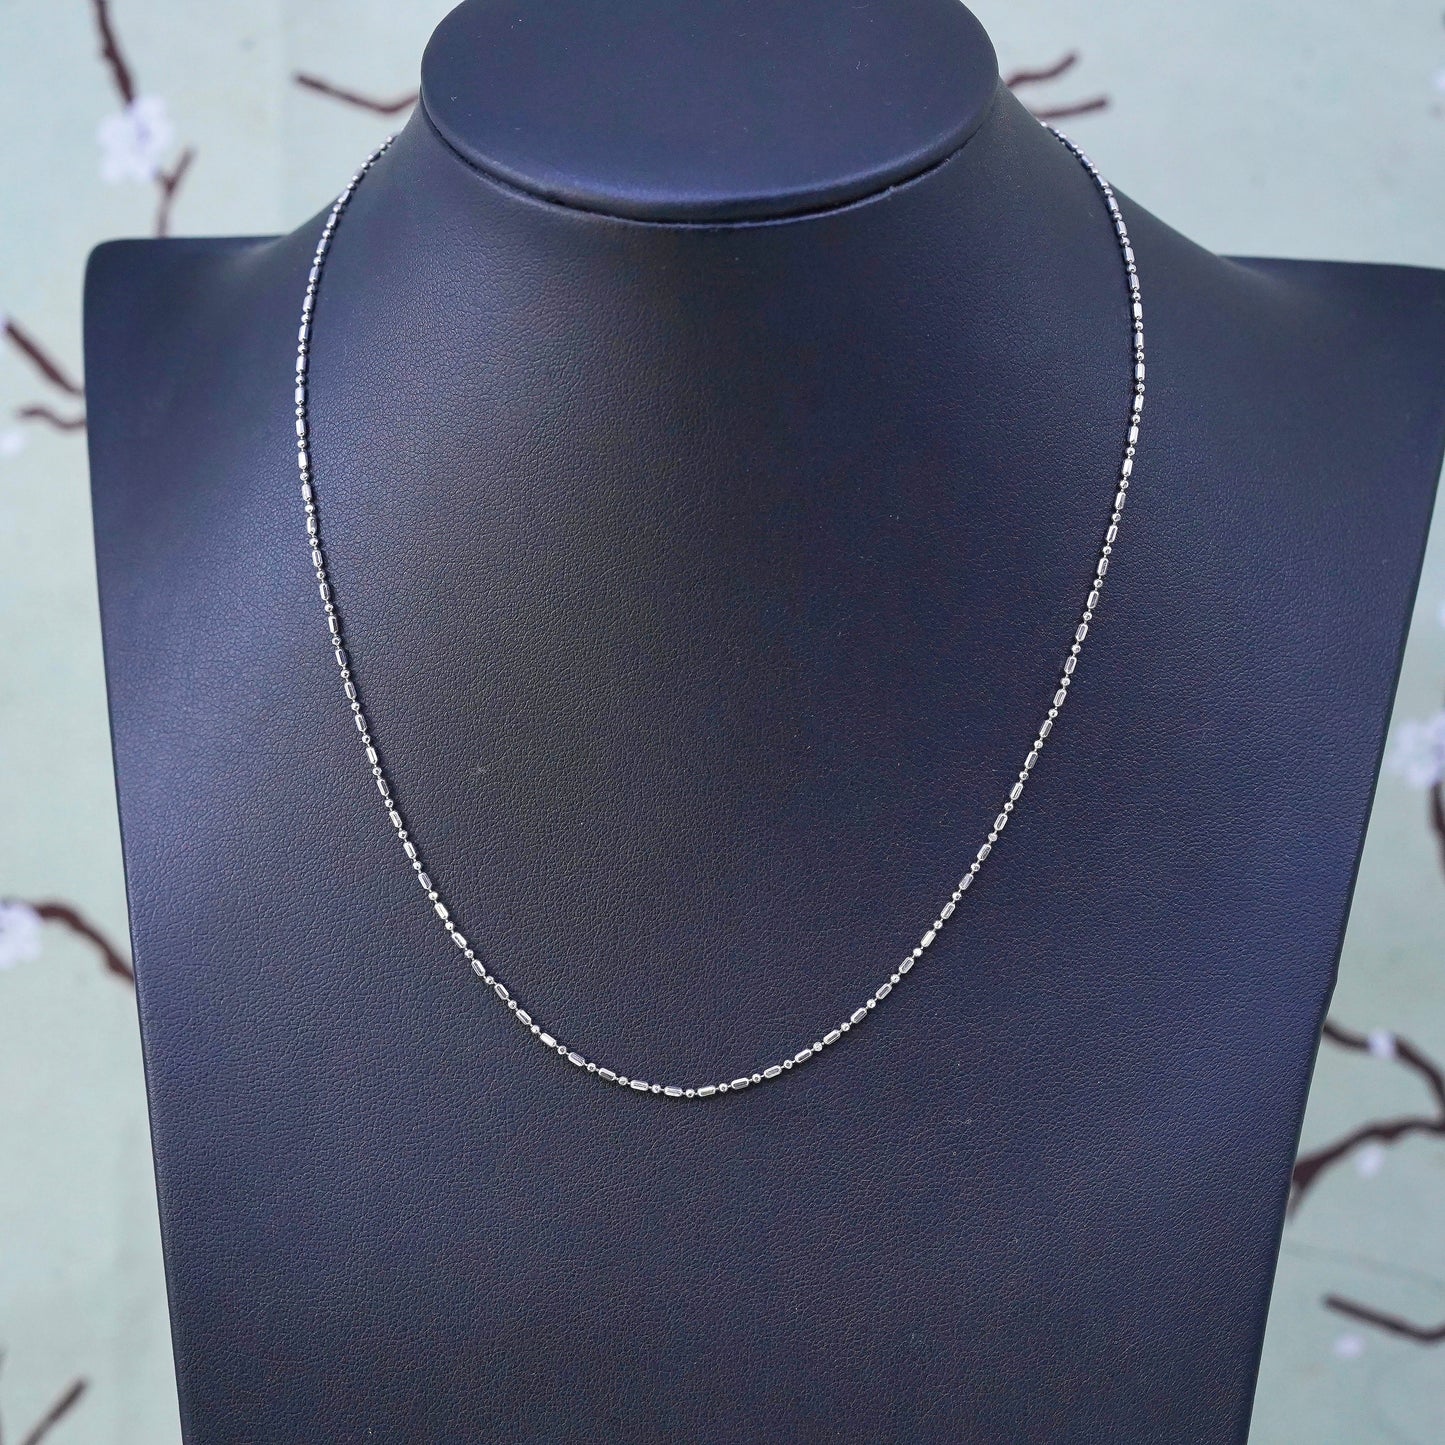 16", 1mm, Vintage sterling silver beads chain, 925 necklace